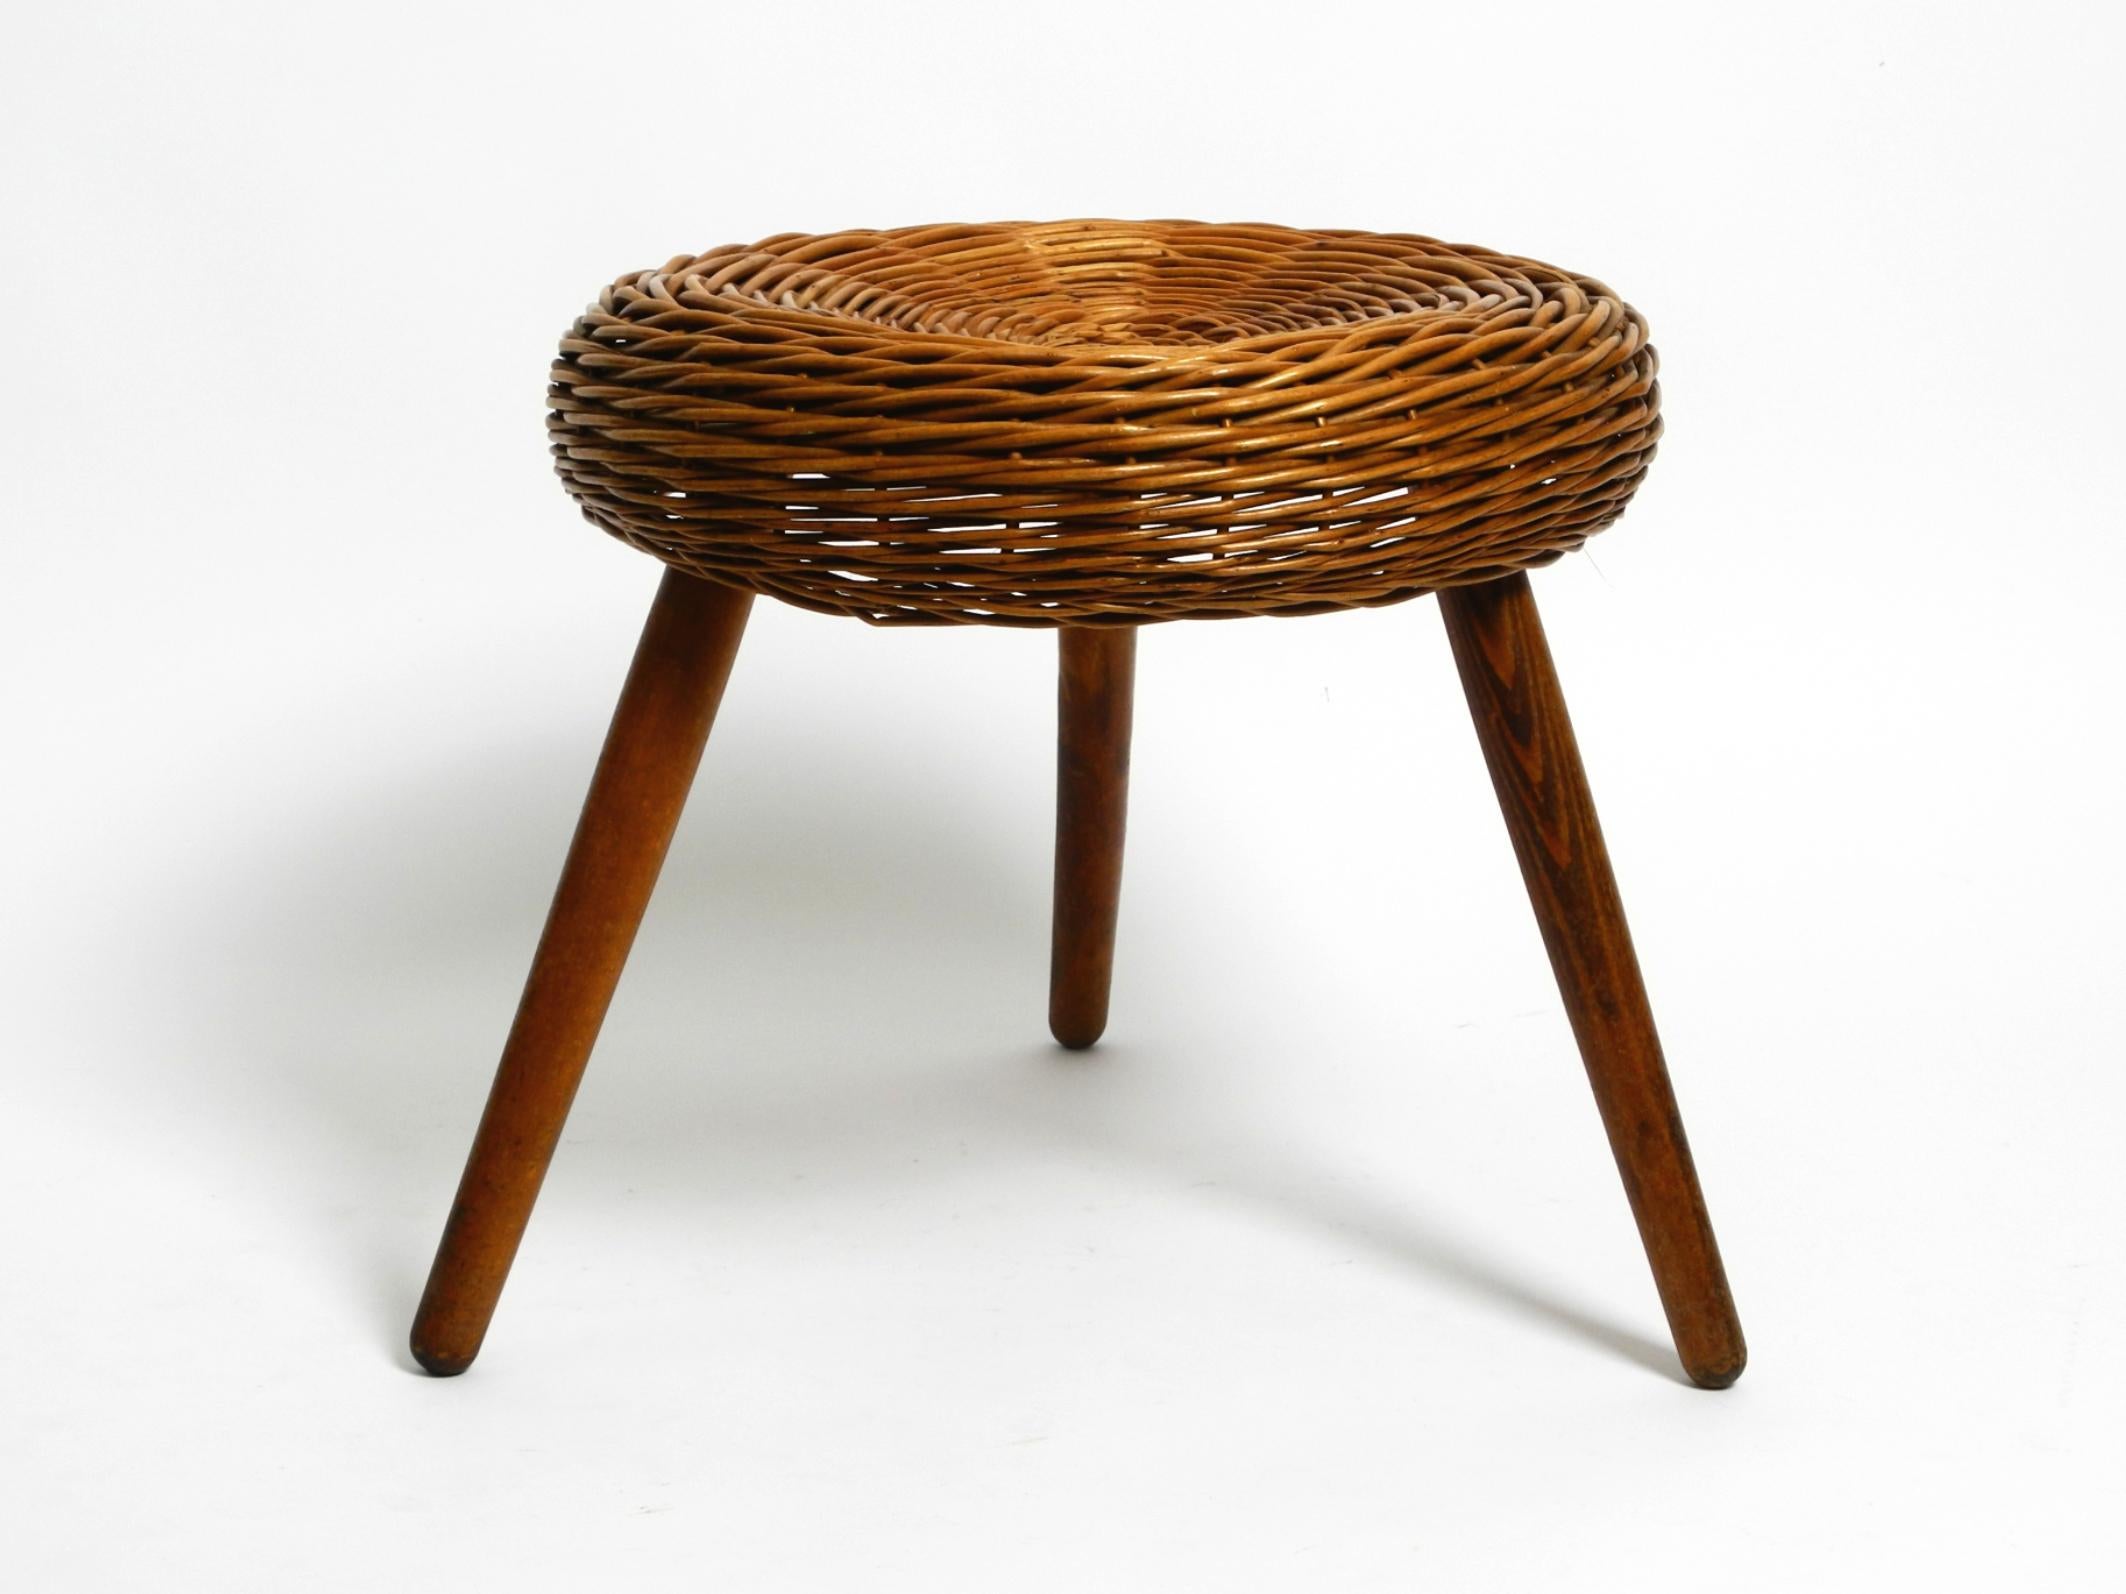 Mid-20th Century Original large Mid Century Modern rattan stool with wooden legs by Tony Paul For Sale